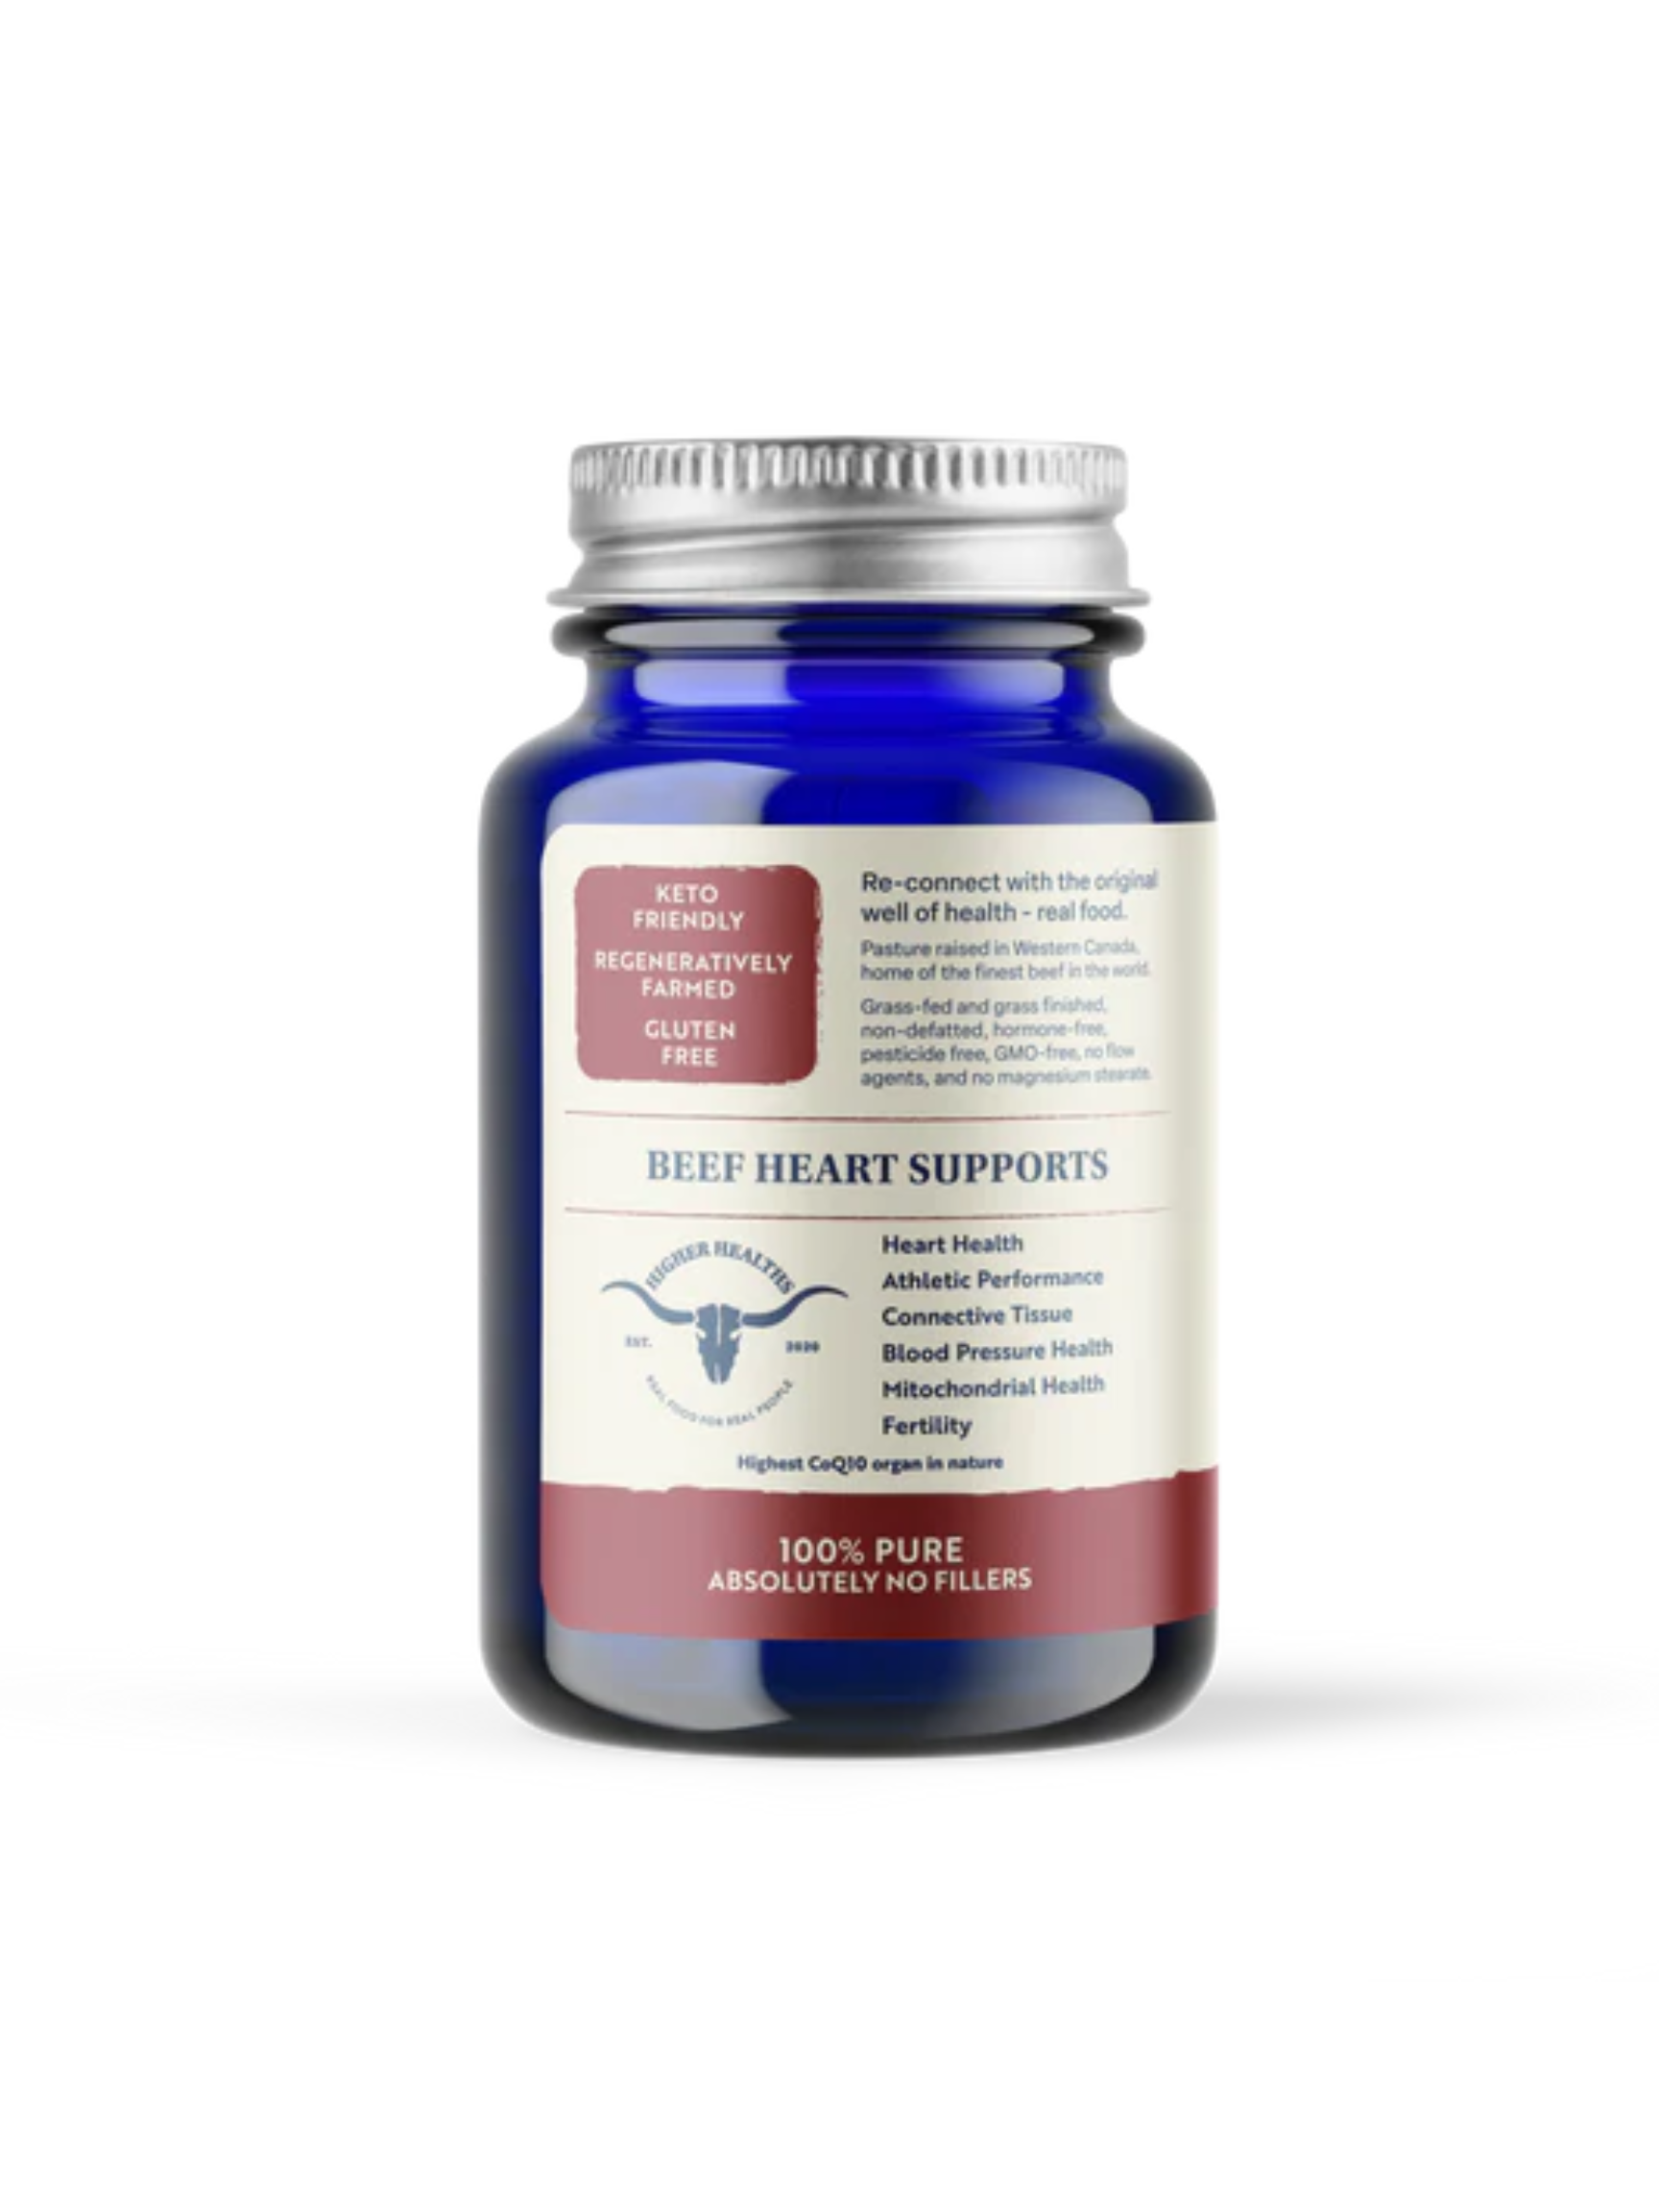 Higher Healths Beef Heart capsules - 100% Grass-Fed/Grass Finished, Freeze Dried